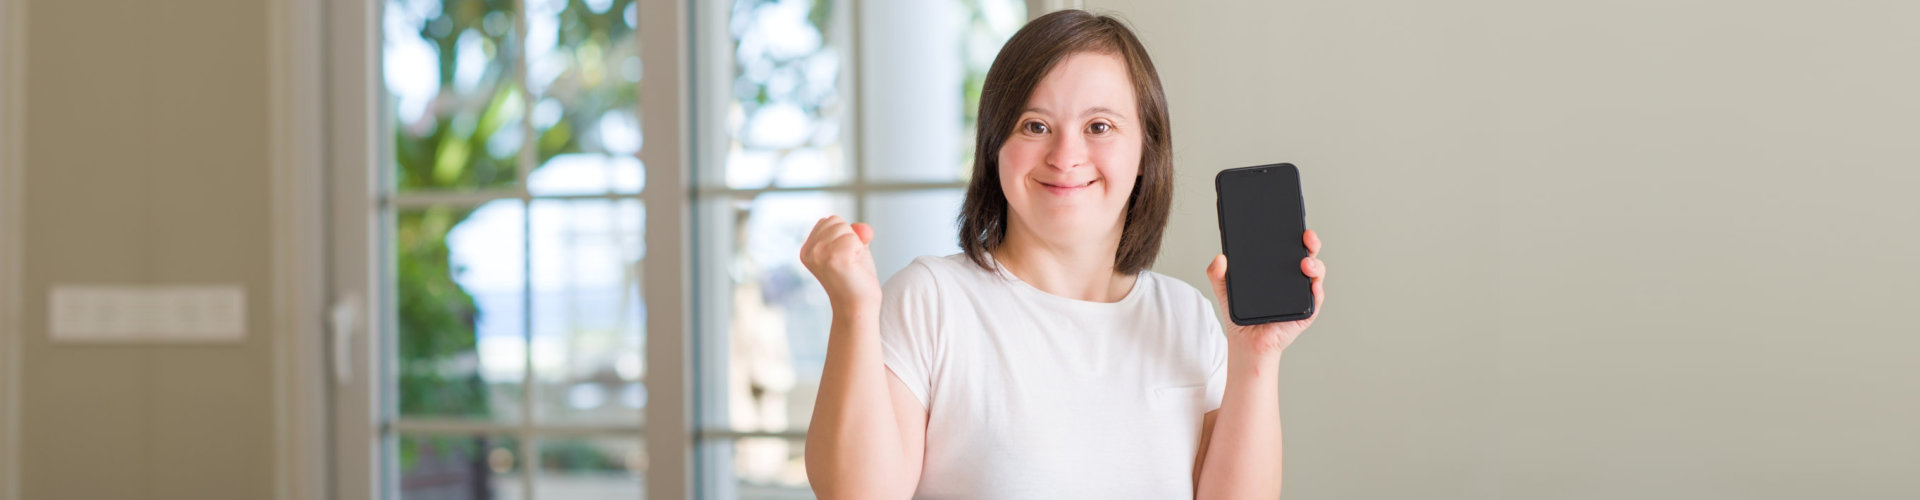 Down syndrome woman at home using smartphone